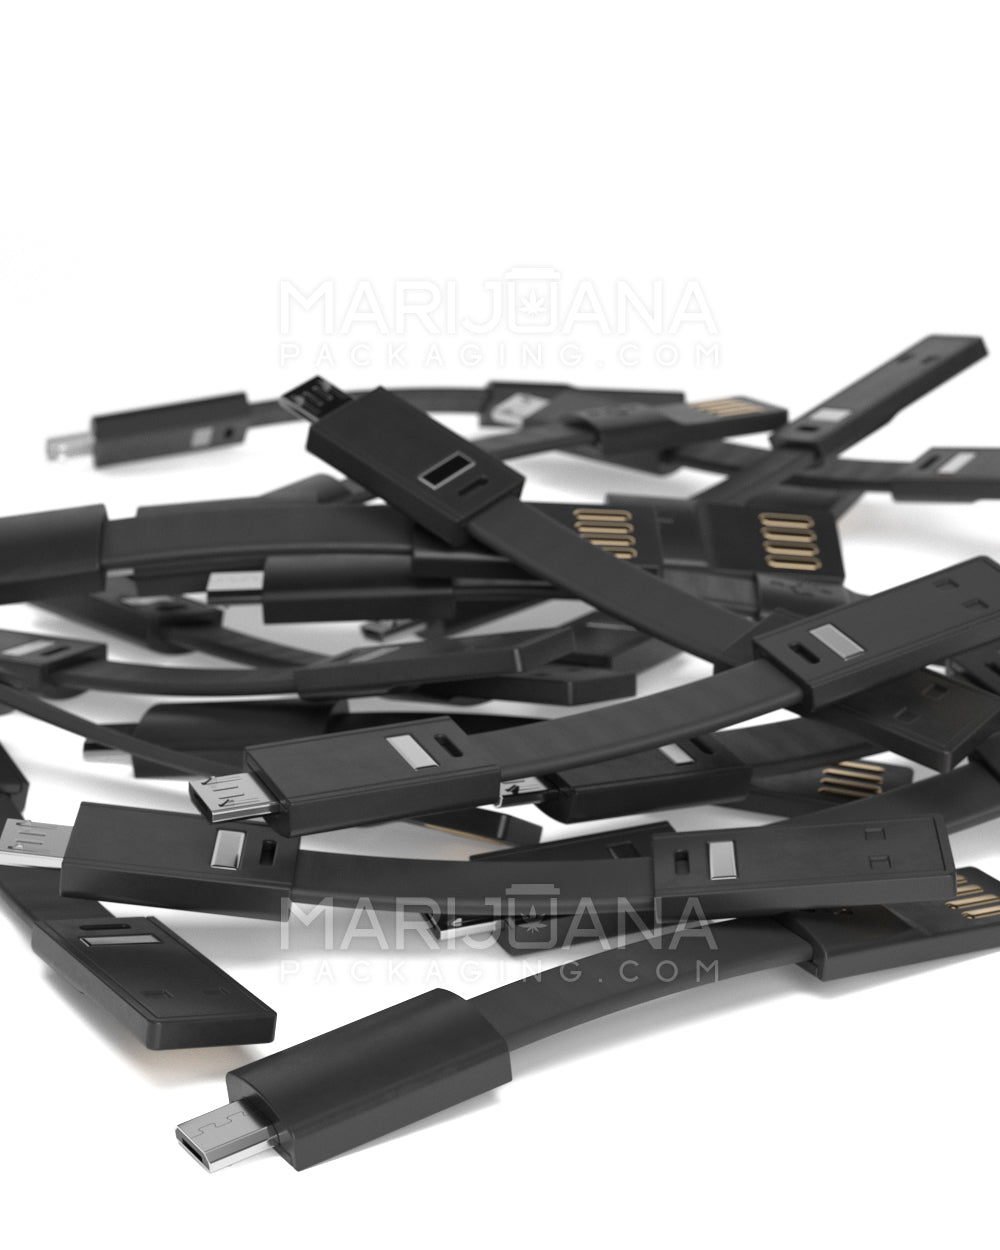 Vaporizer 3.5" USB to Micro USB Connection Cable | Black - 100 Count